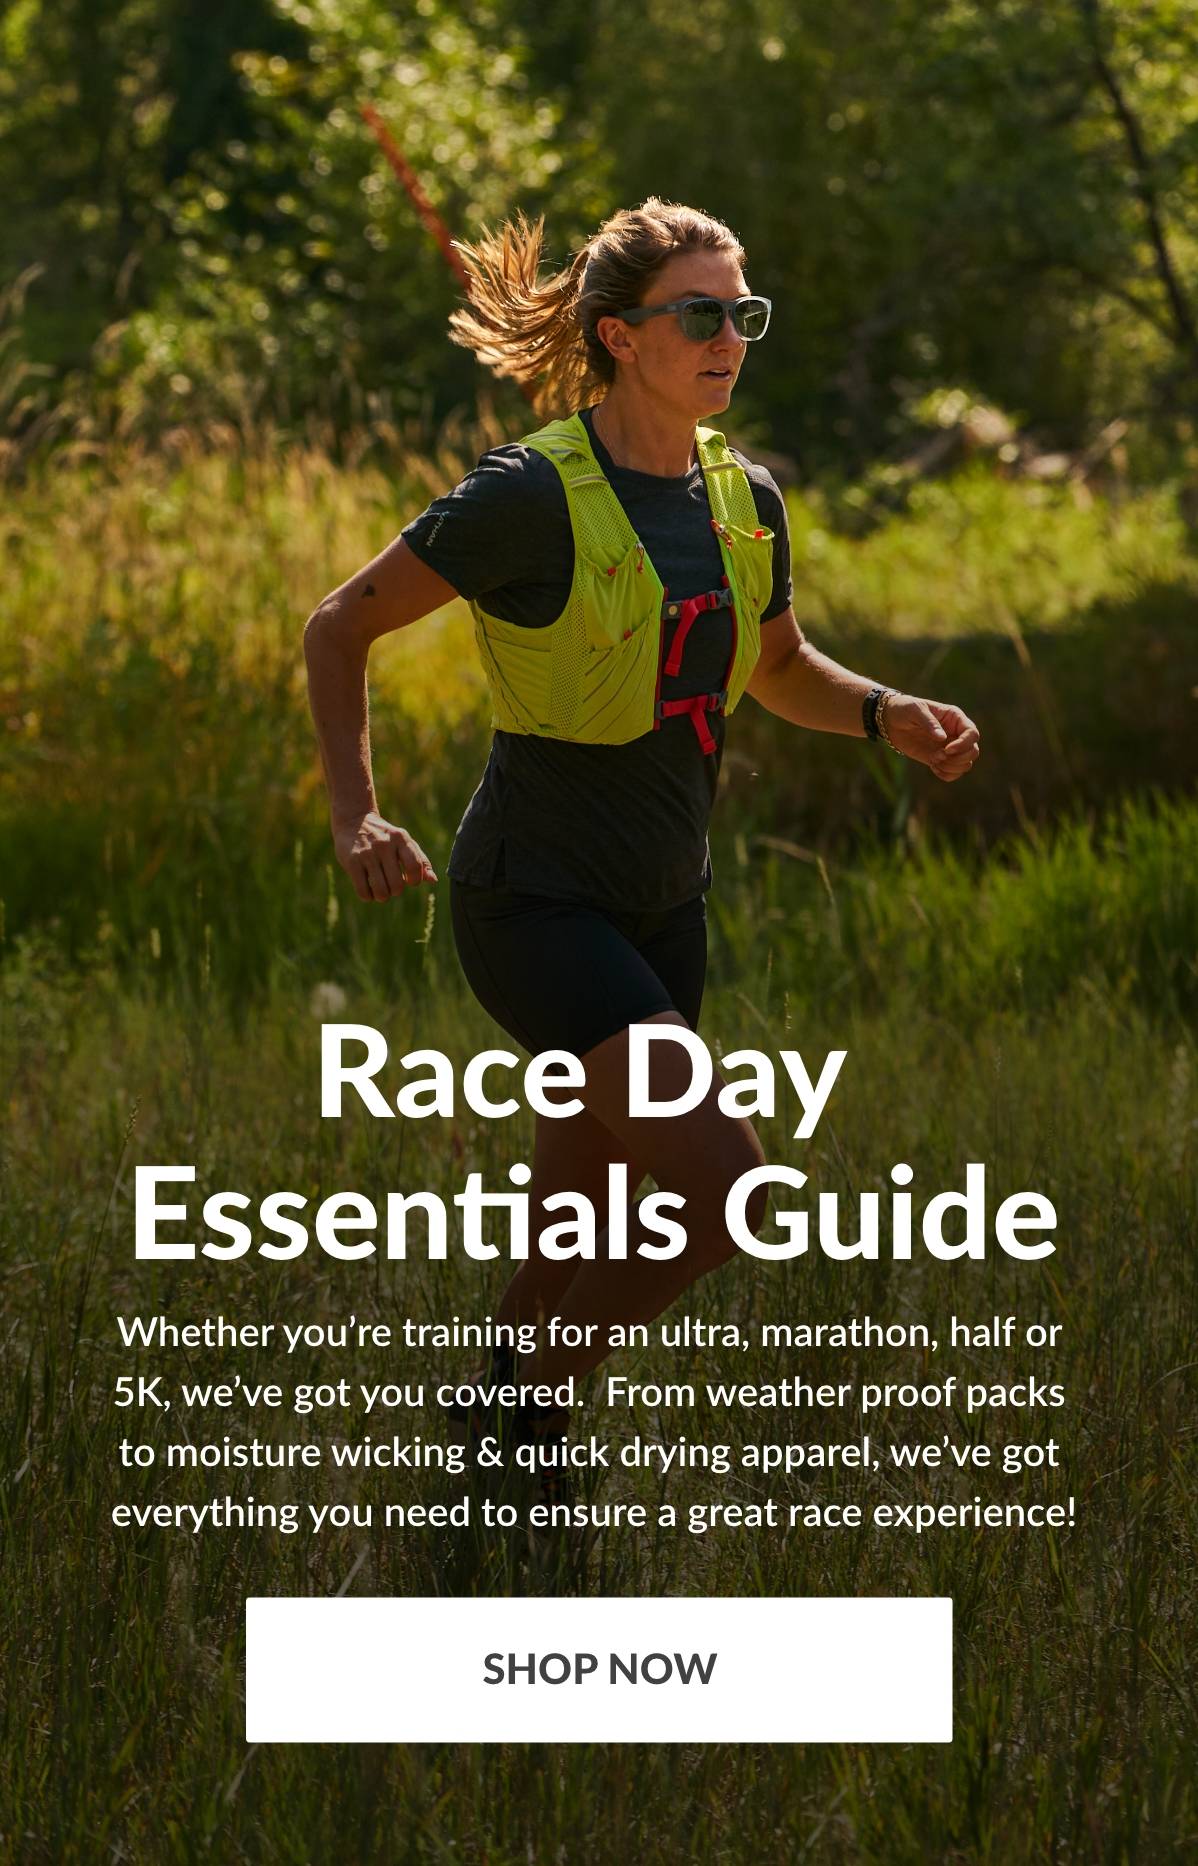 Race Day Essentials Guide. Whether you're training for an ultra, marathon, half or 5k, we've got you covered. From weather proof packs to moisture wicking & quick drying apparel, we've got everything you need to ensure a great race experience! SHOP NOW